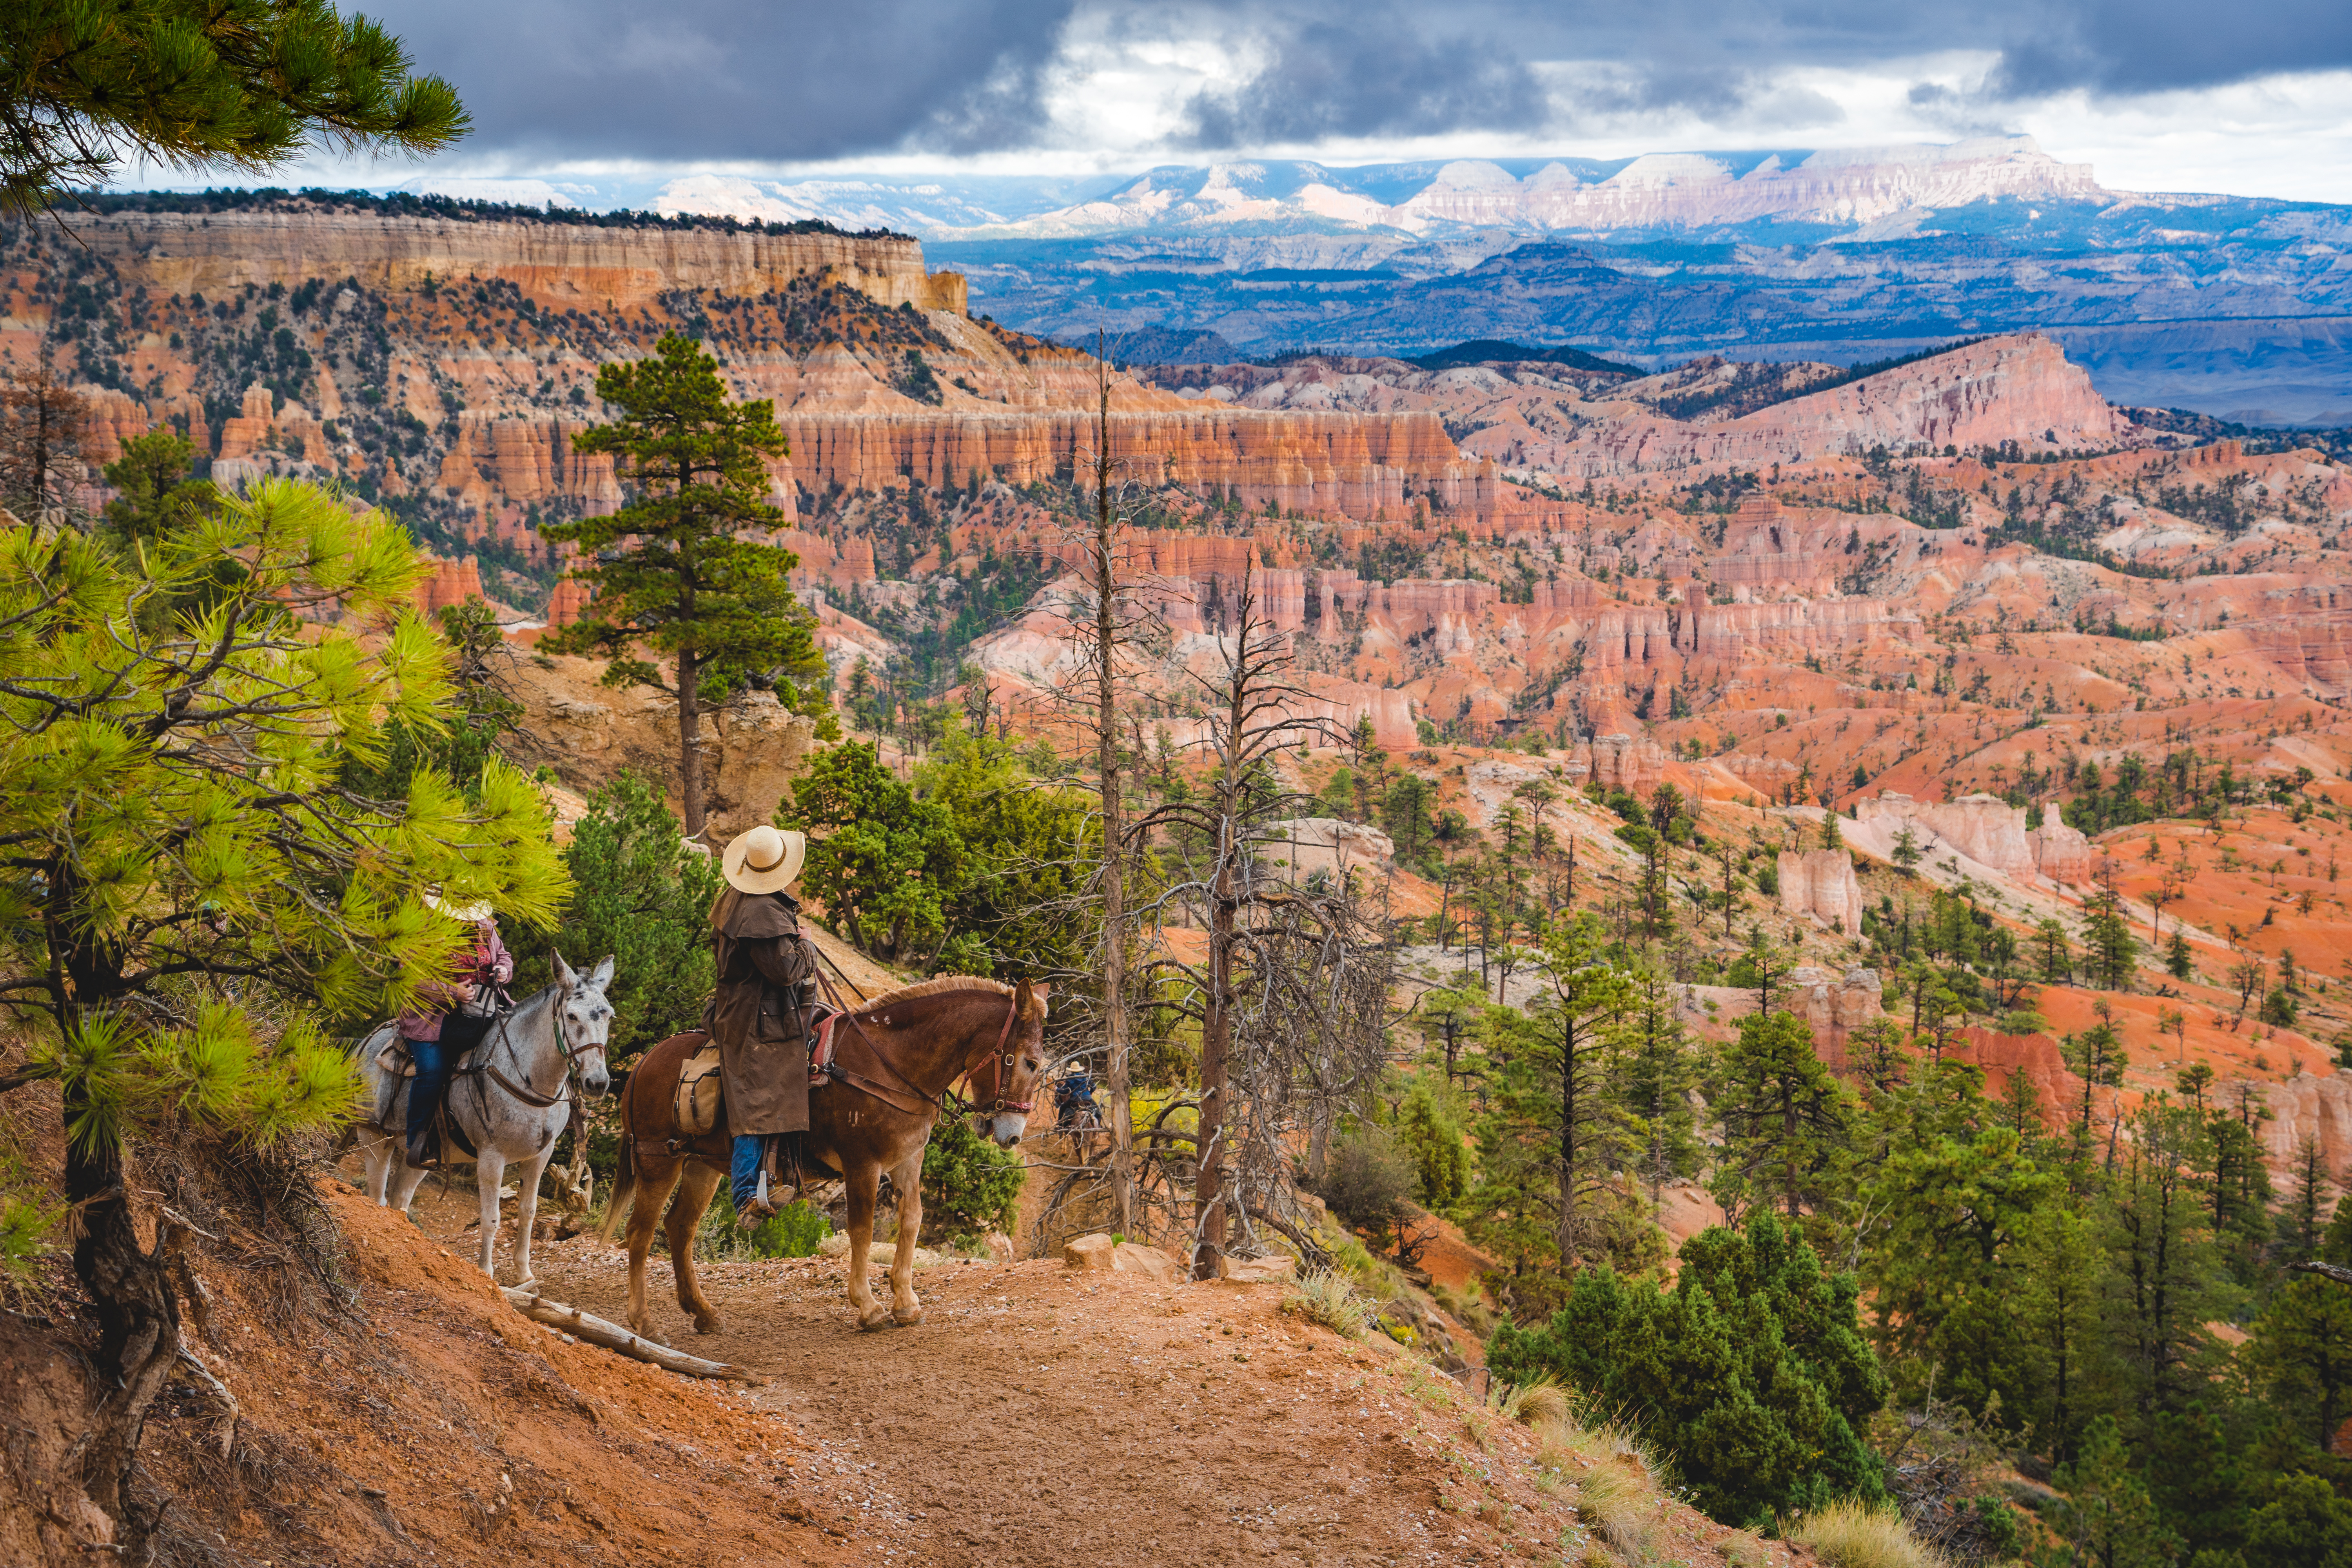 A horse rider pauses along a trail overlooking a vast landscape of red rock spires and cliffs